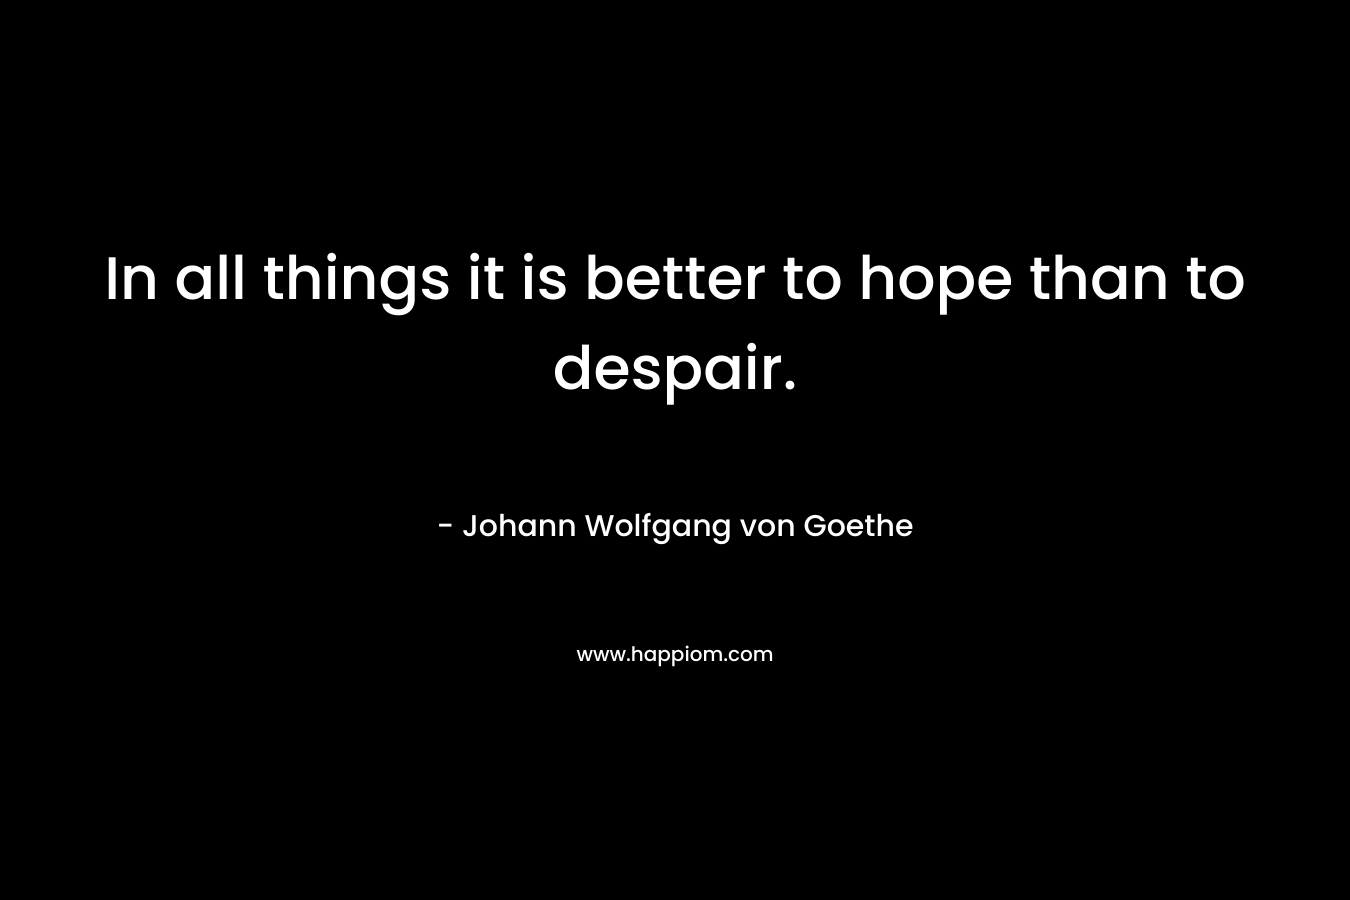 In all things it is better to hope than to despair. – Johann Wolfgang von Goethe